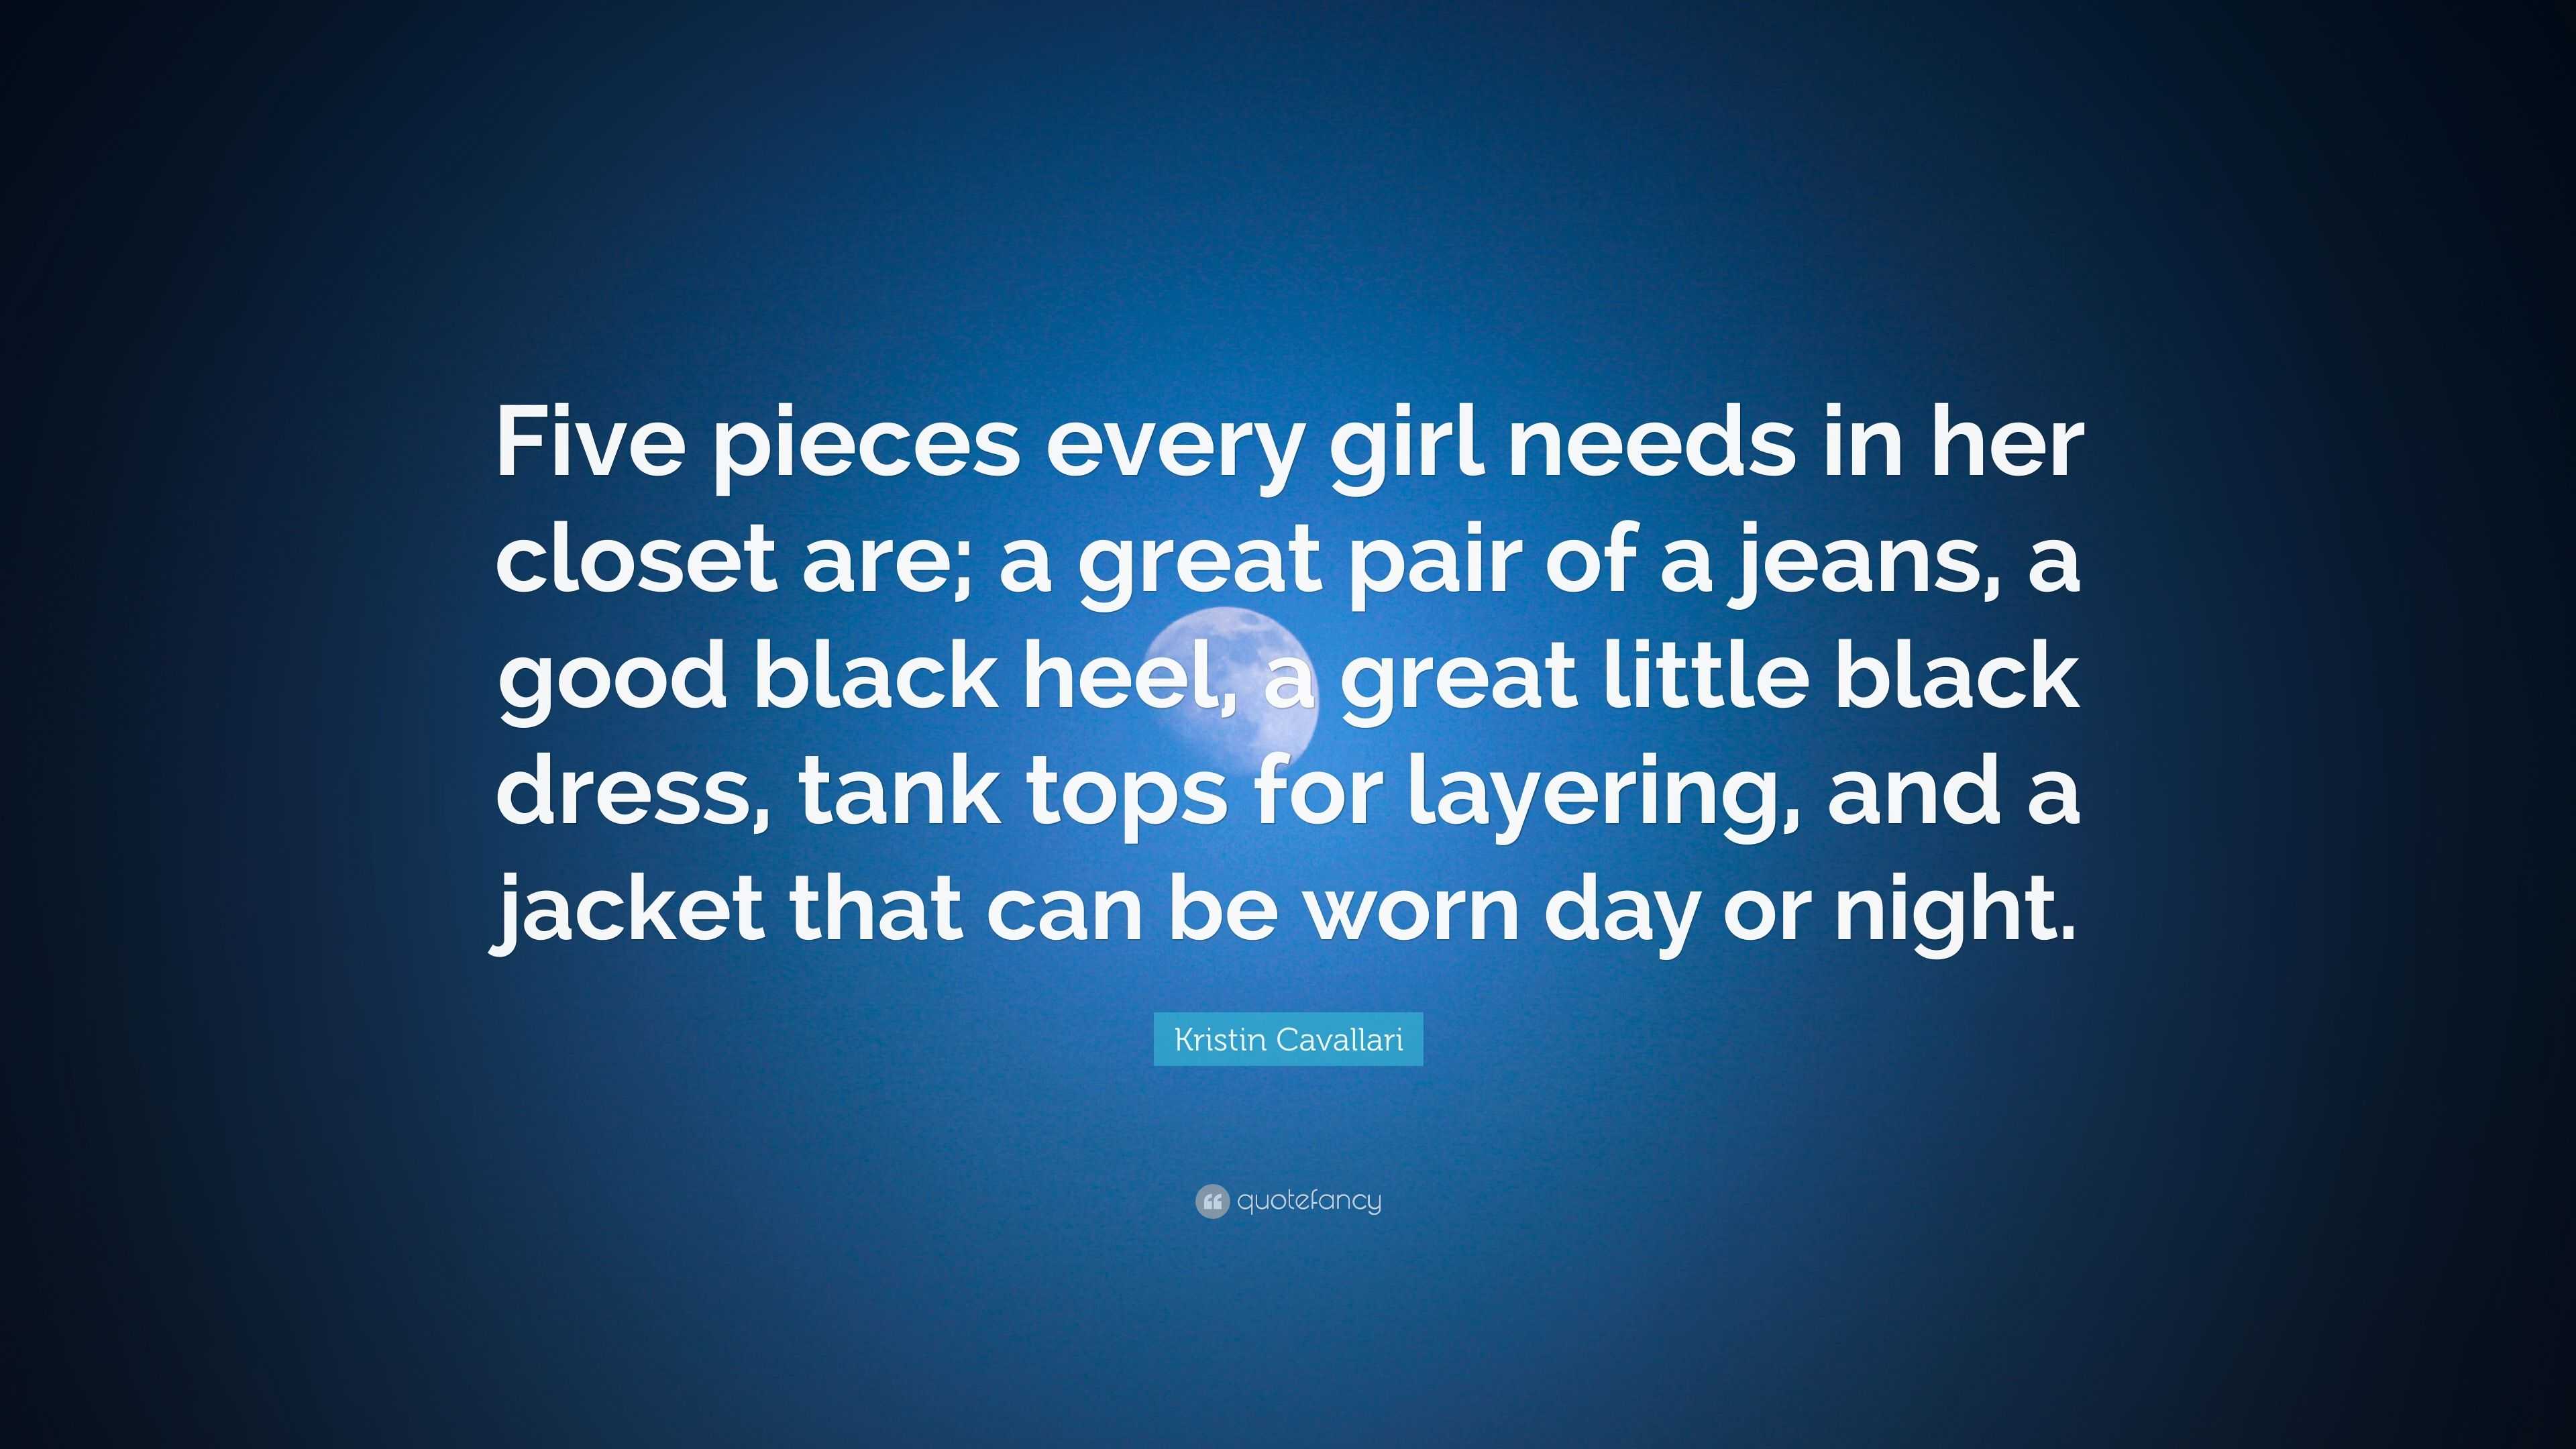 80+ Timeless Black Dress Quotes and Captions for Instagram